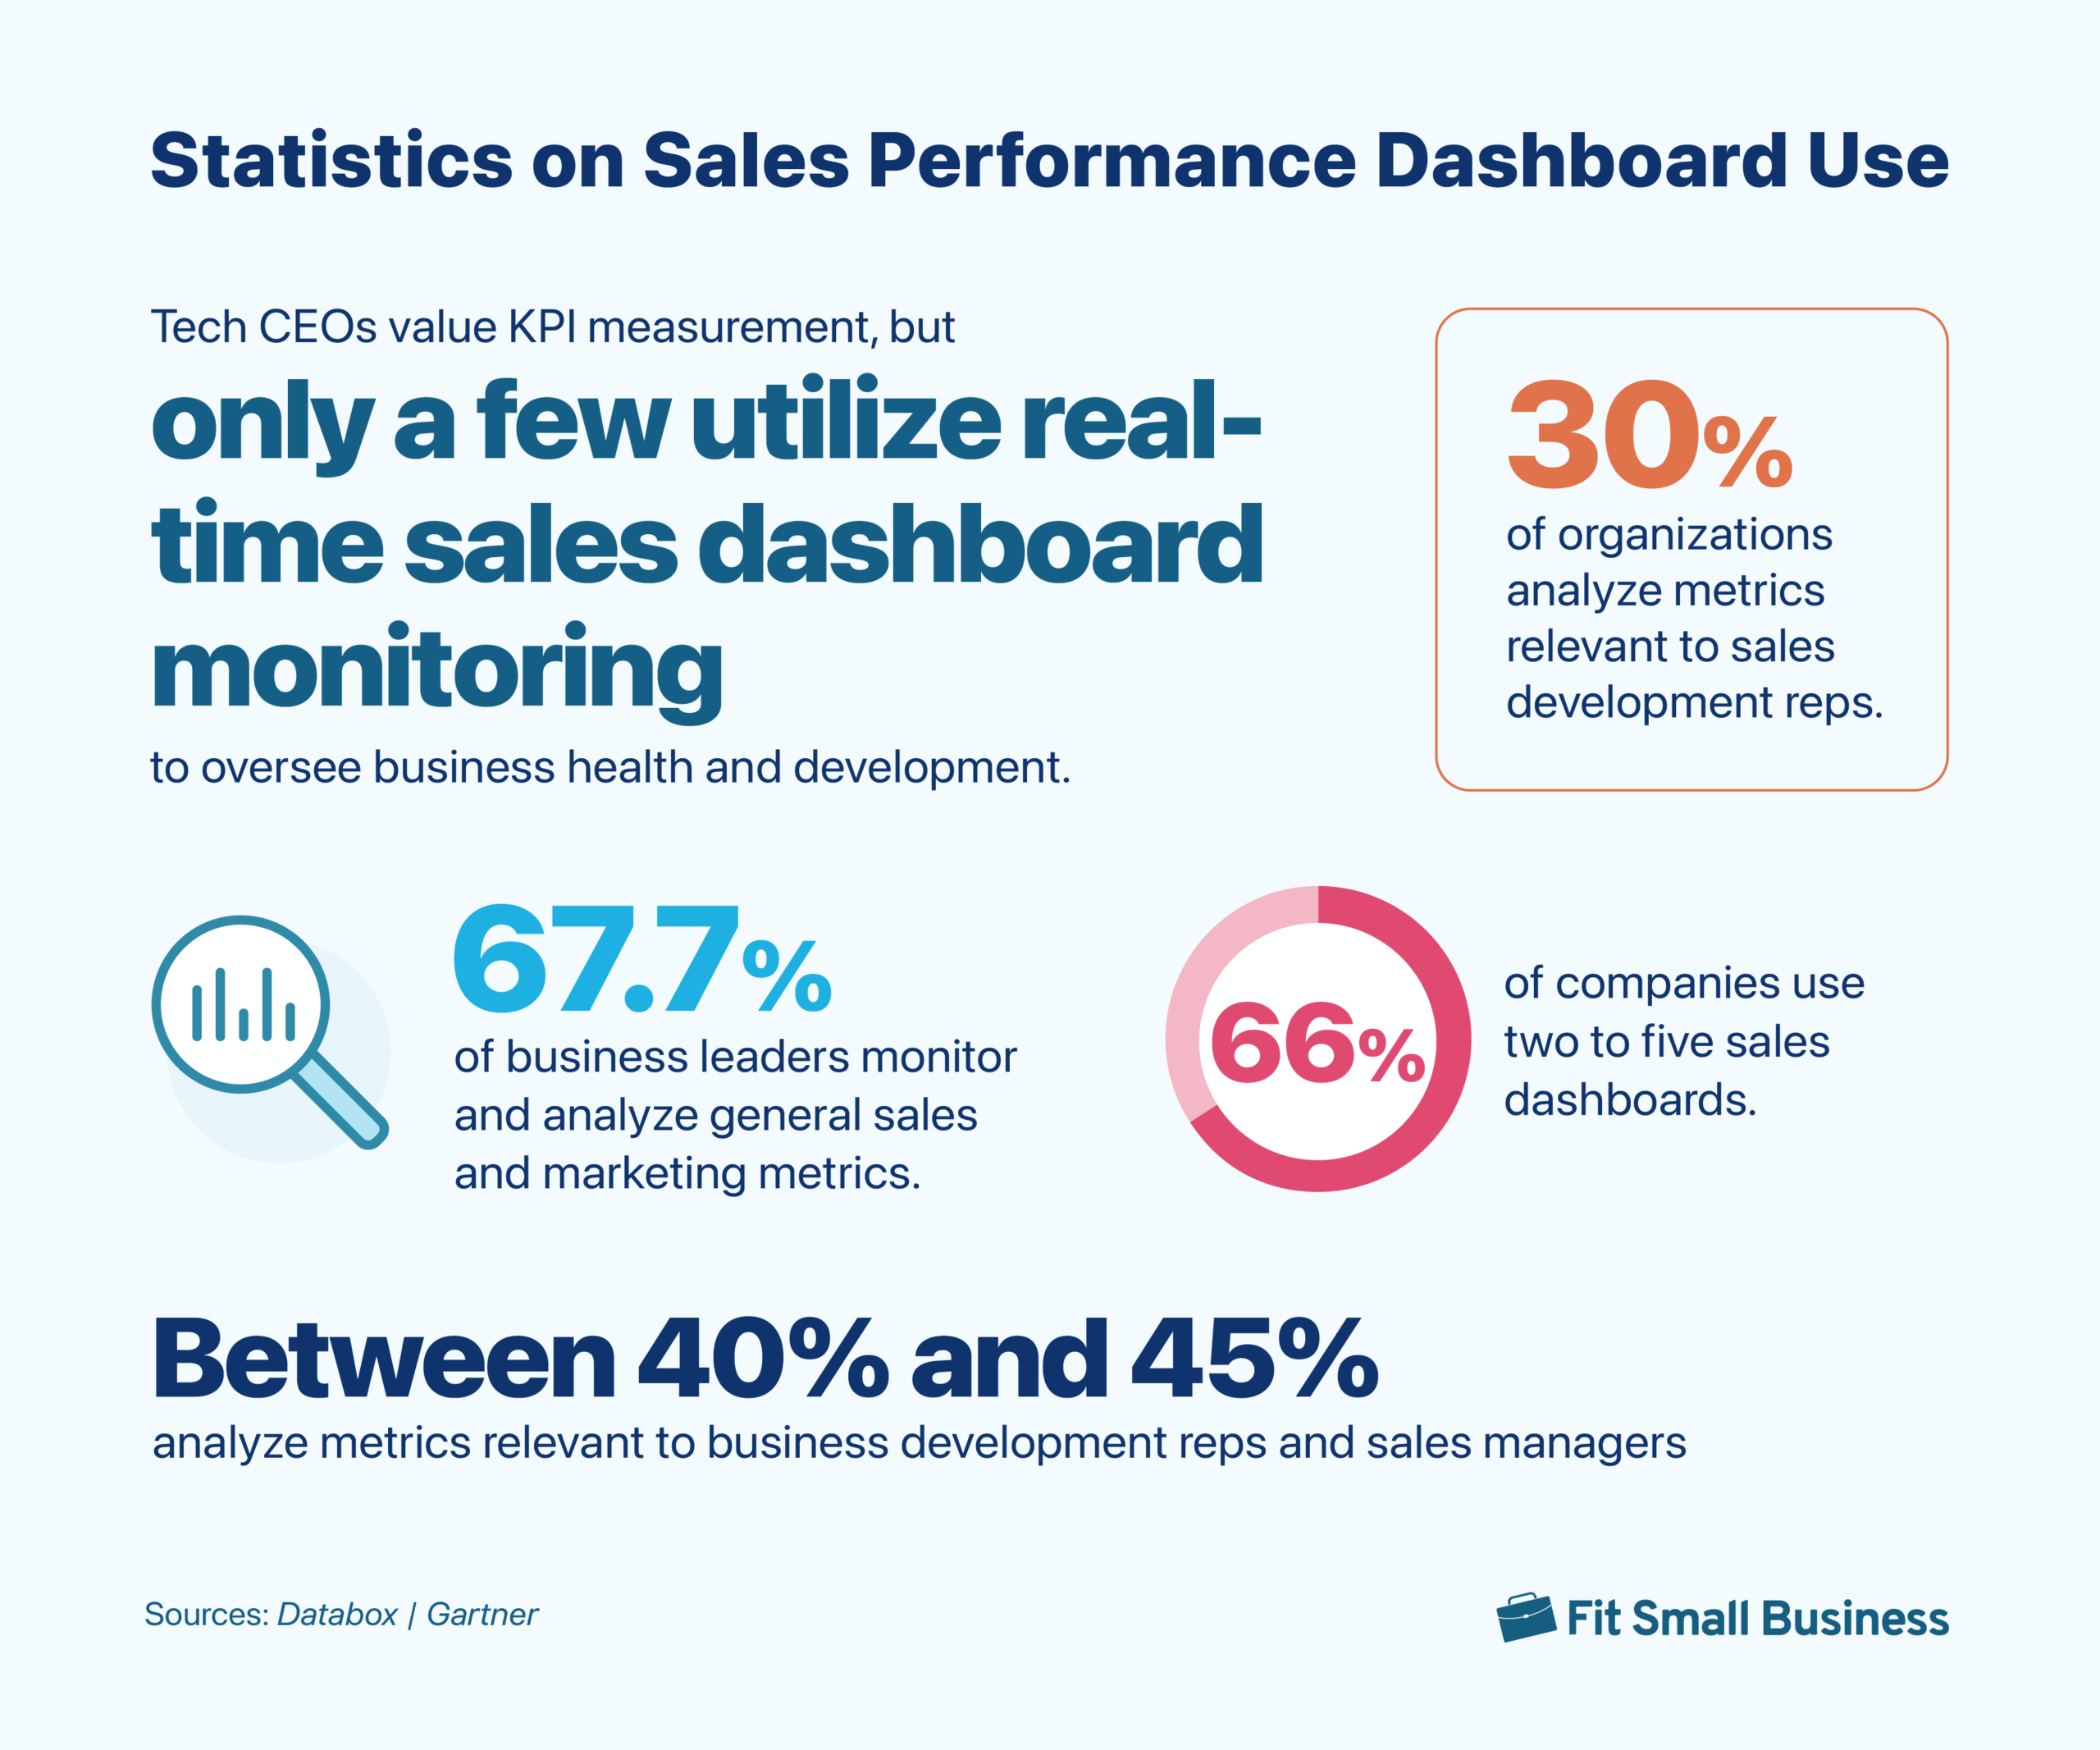 An infographic showing several statistics on sales performance dashboard use.